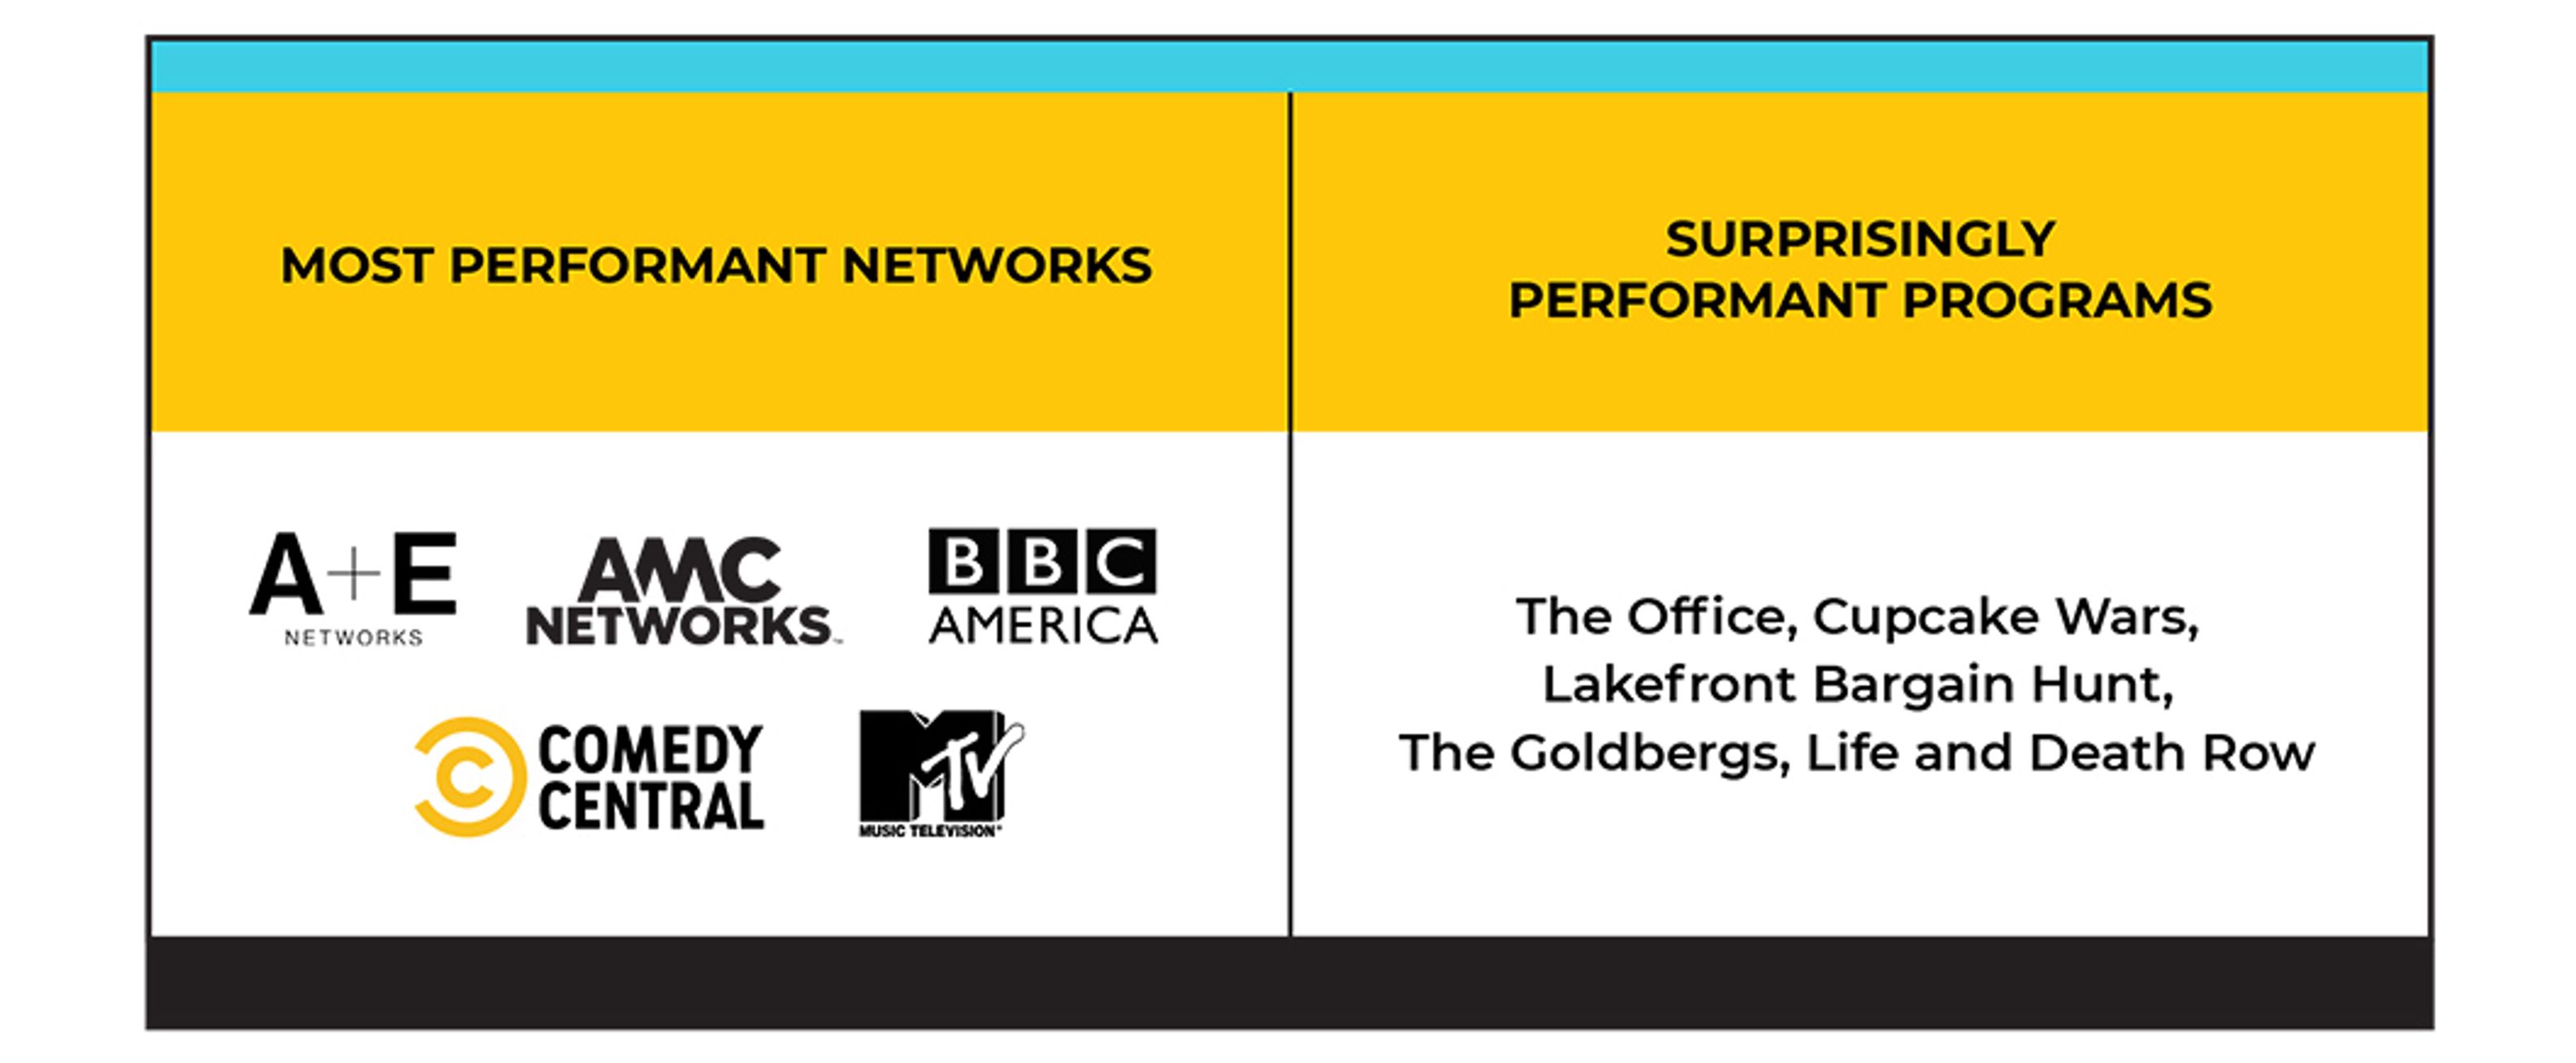 TV networks and spots that were cost-effective in driving target audience reach.